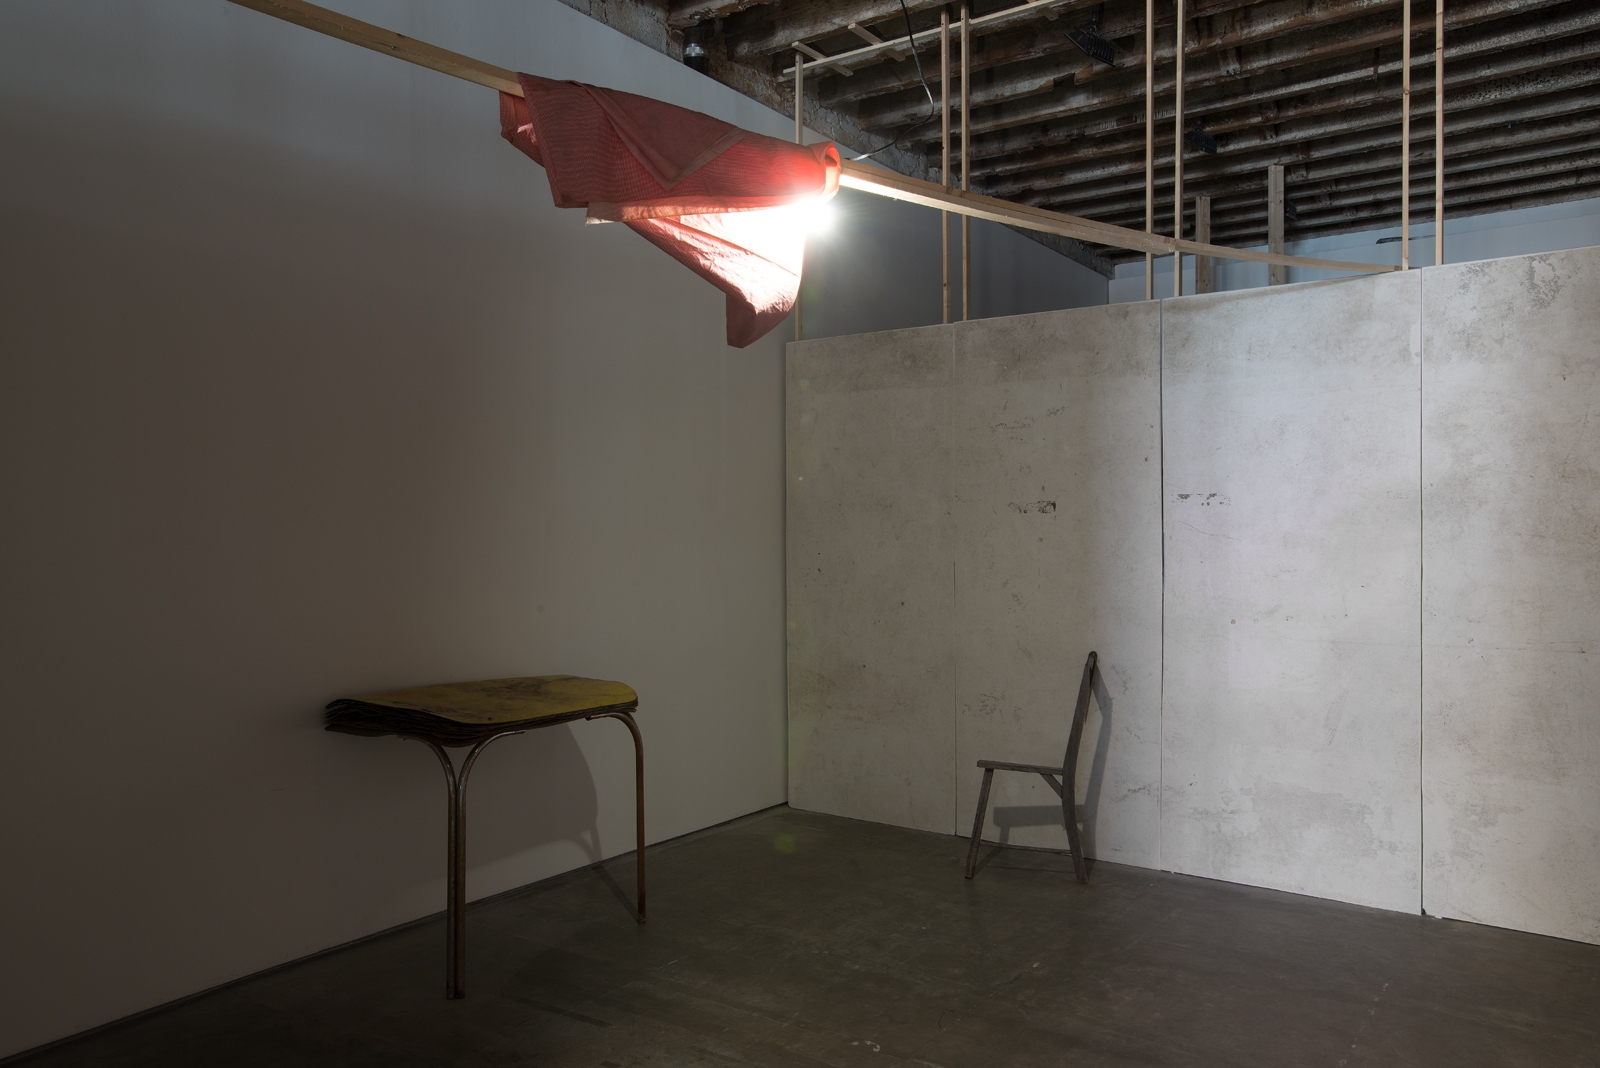 Untitled, 2013 (installation view). Courtesy the artist and Simon Preston Gallery, New York